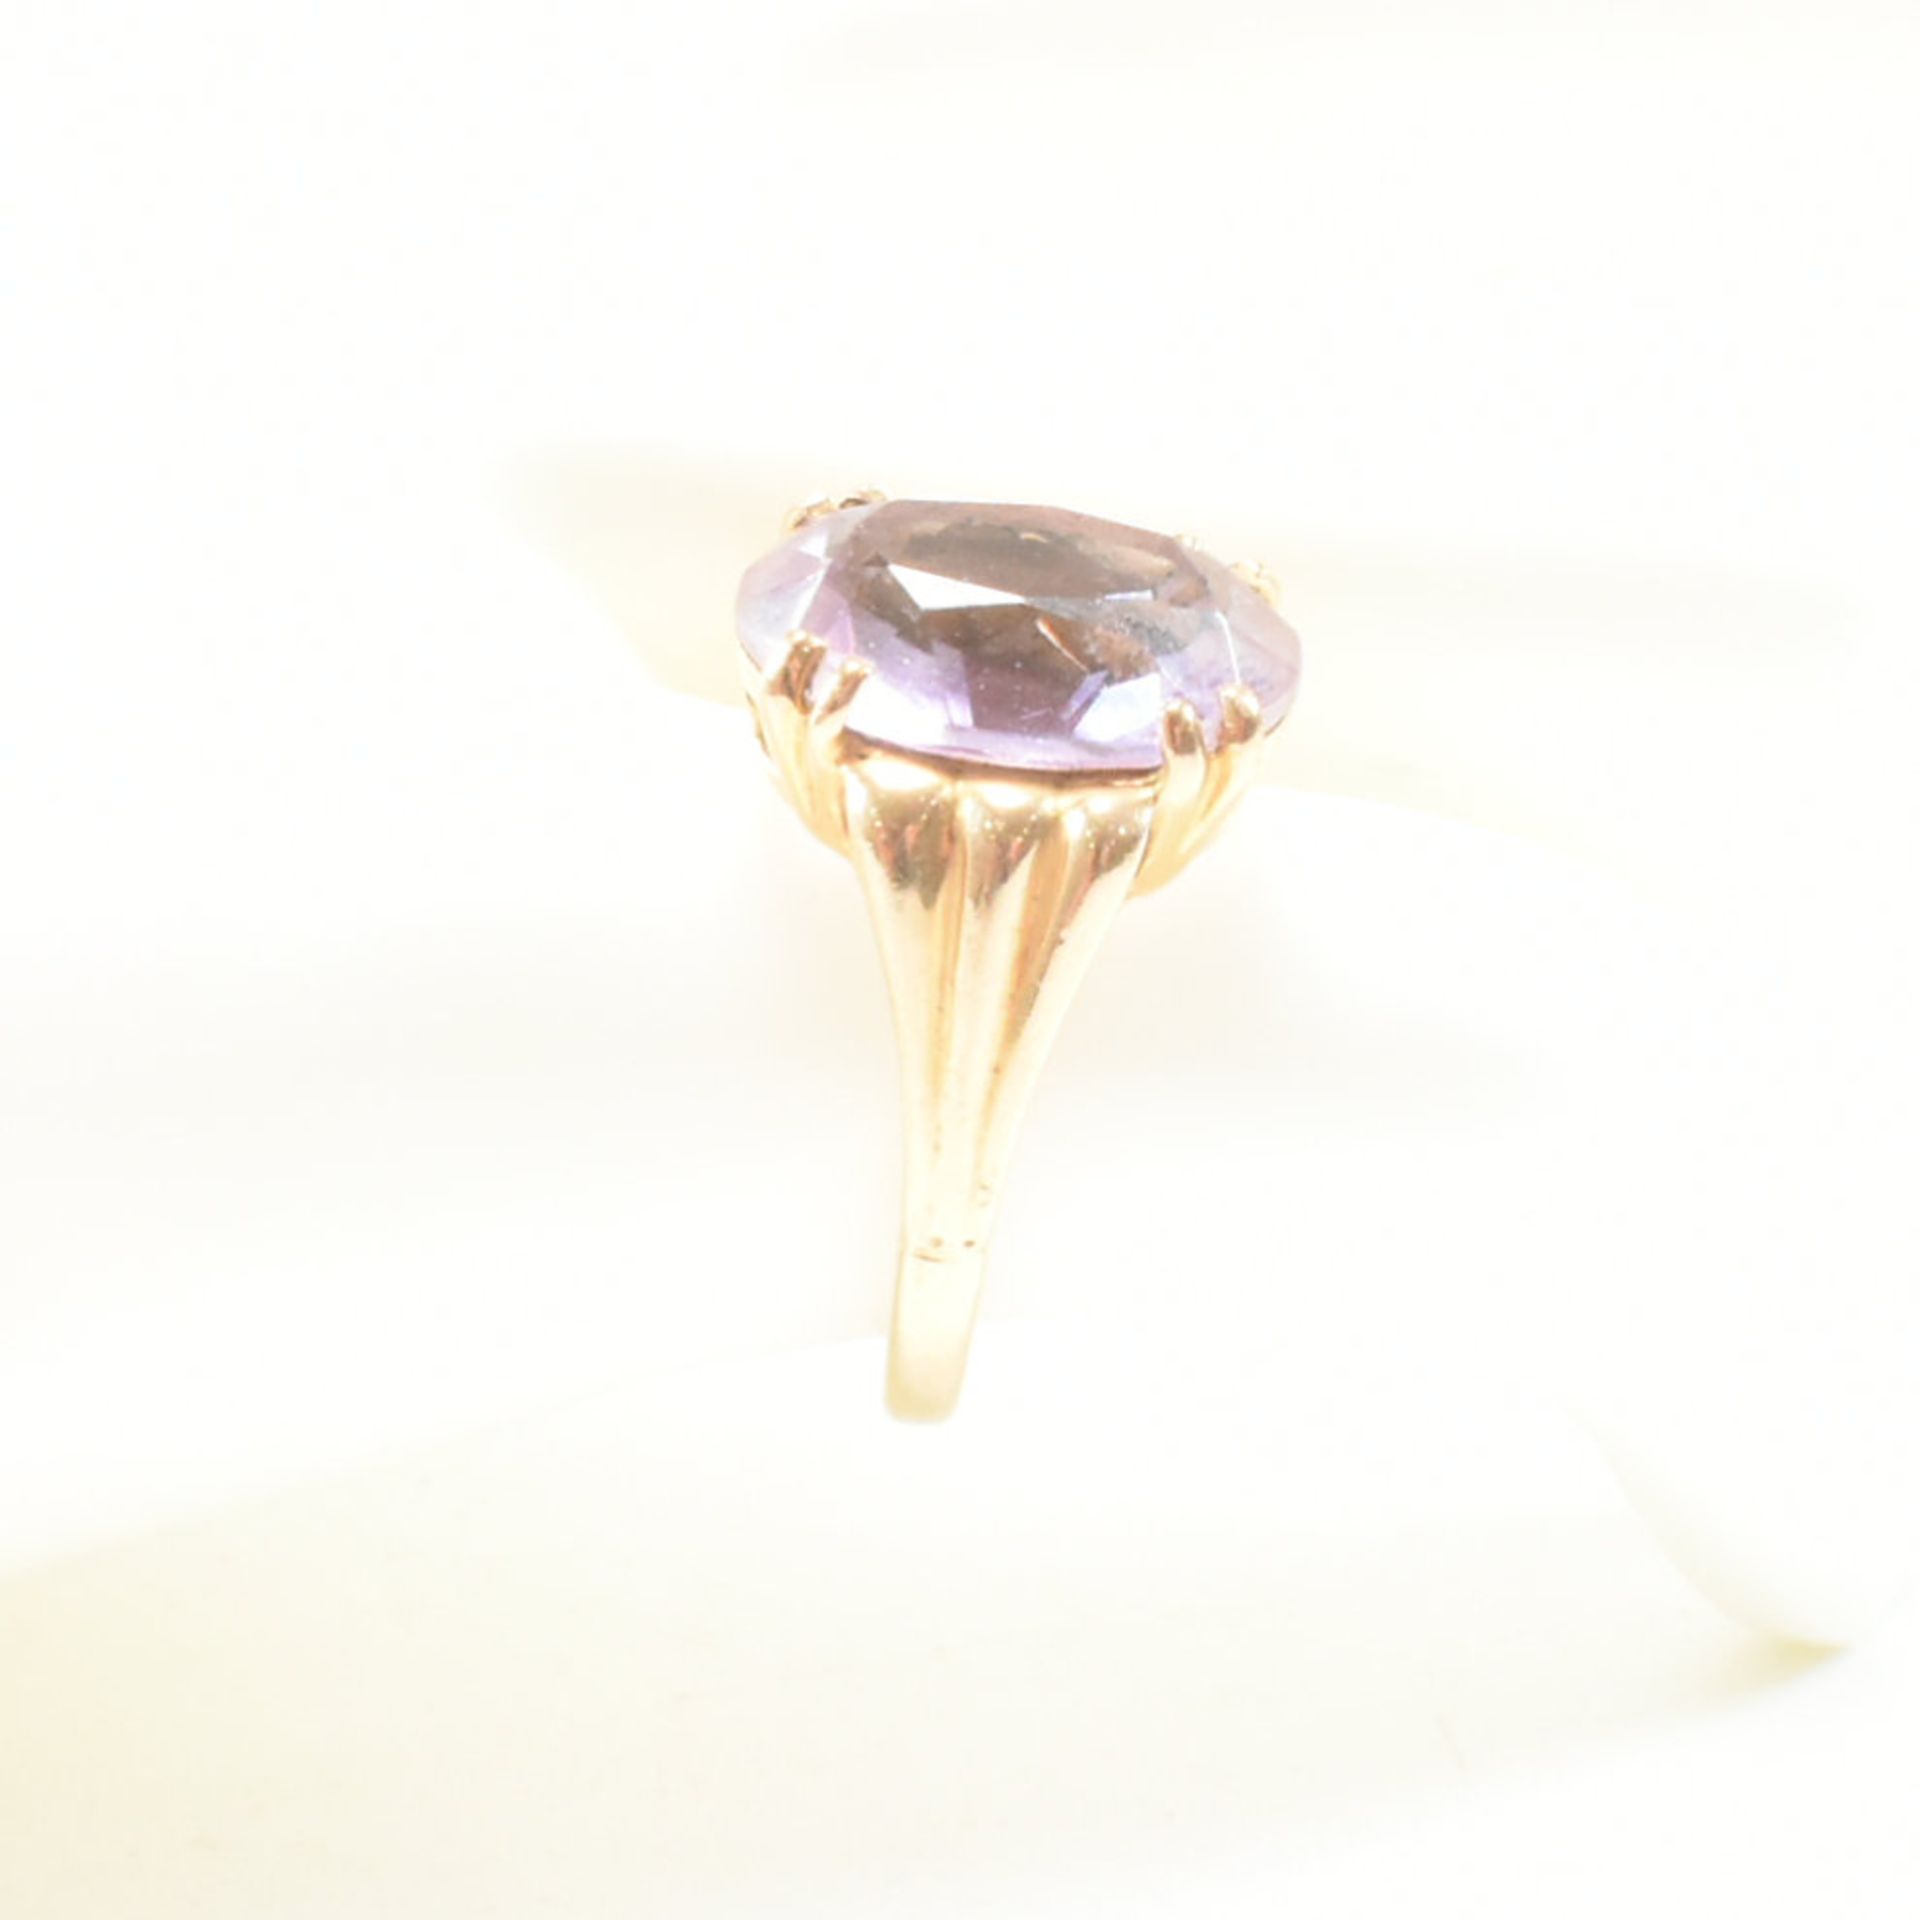 VINTAGE HALLMARKED 9CT GOLD & AMETHYST SOLITAIRE RING - Image 9 of 9